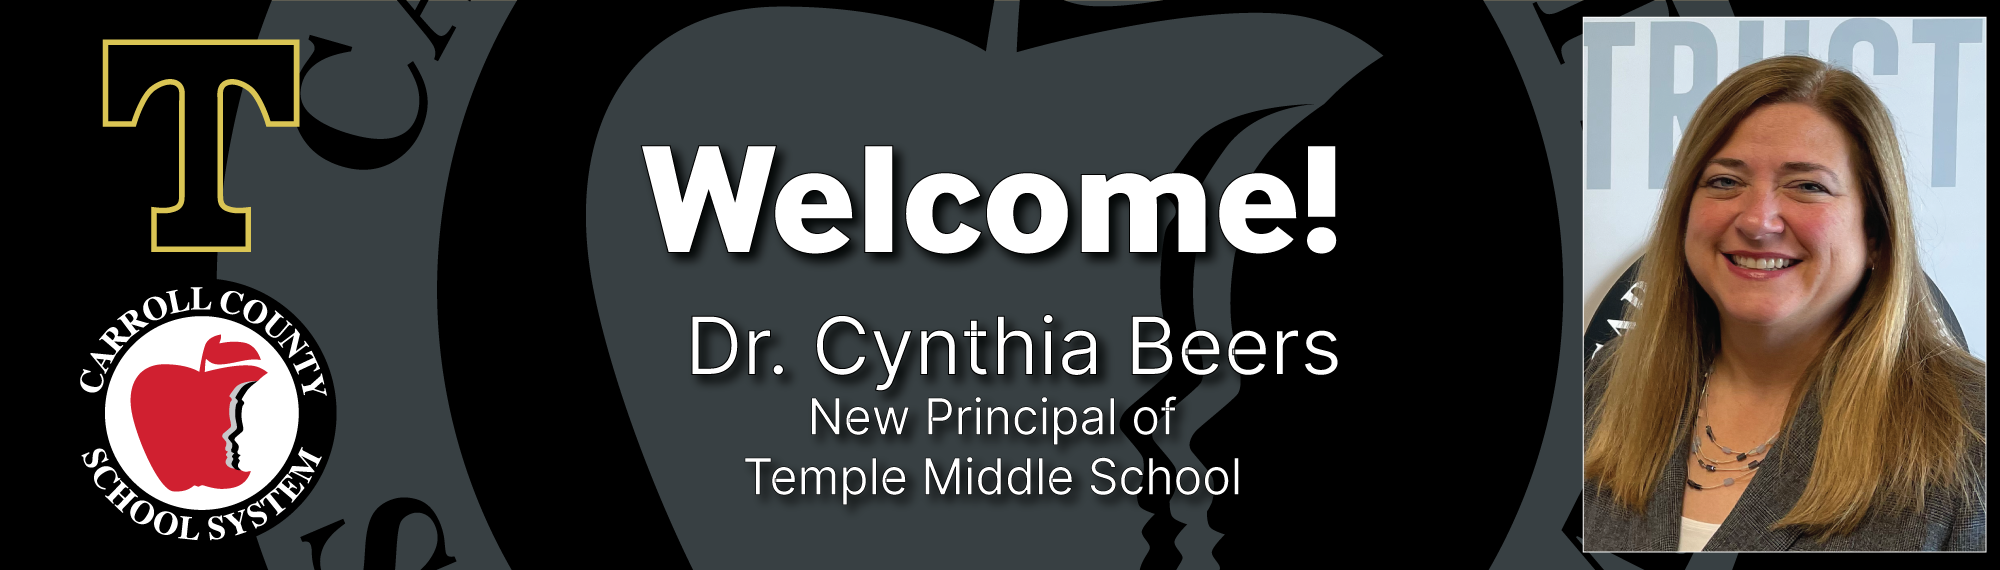 new principal of temple middle school